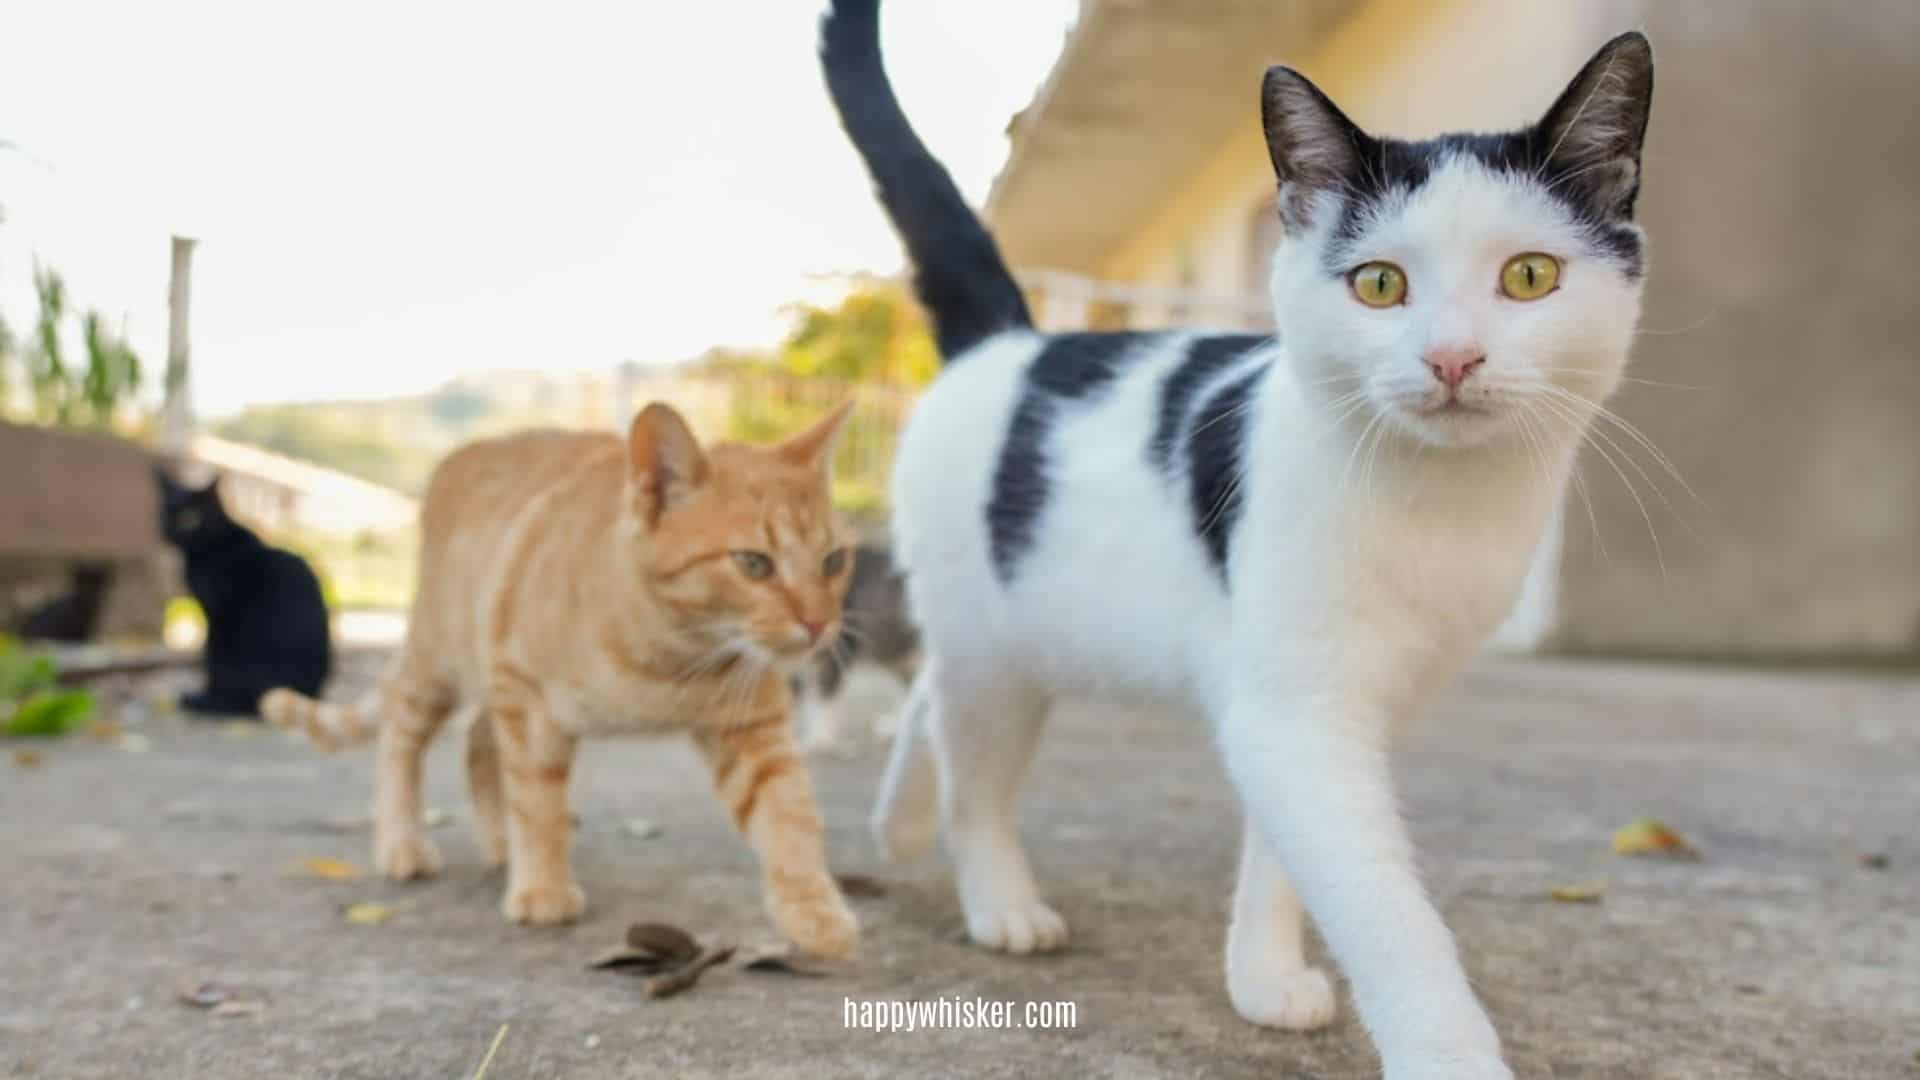 cats walk and wag their tails